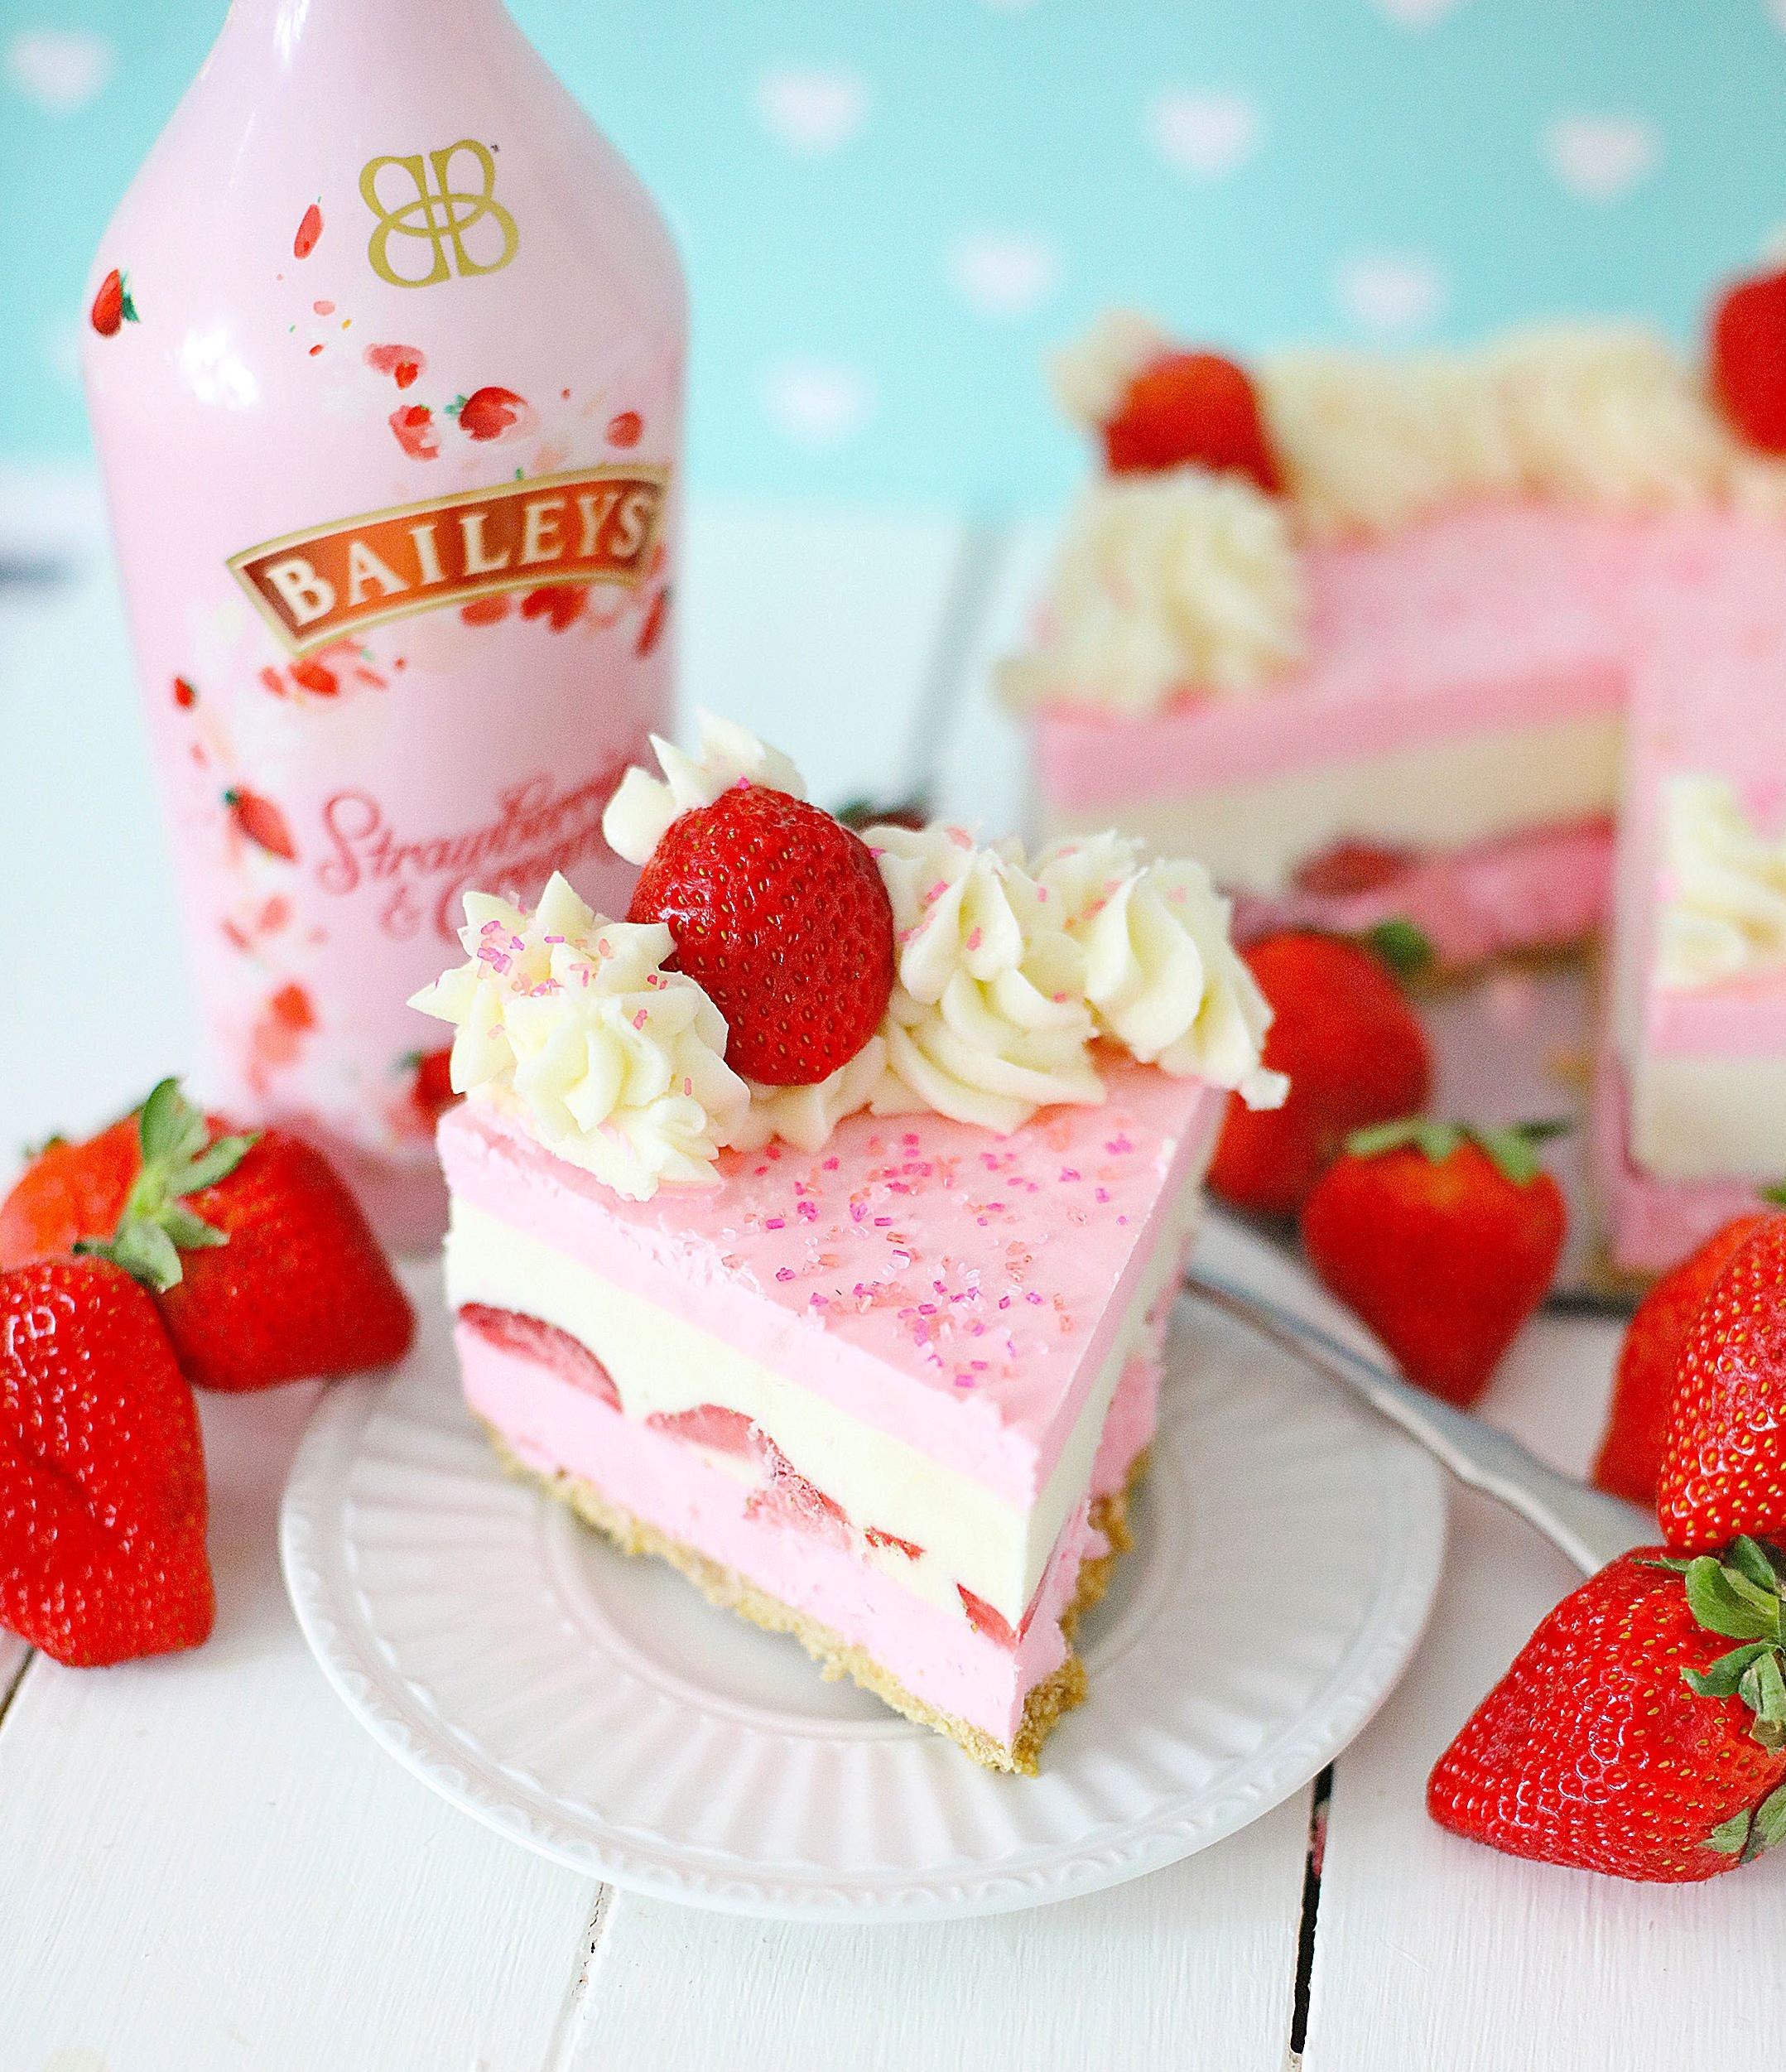 Indulge in the richness of our strawberry cheesecake recipe